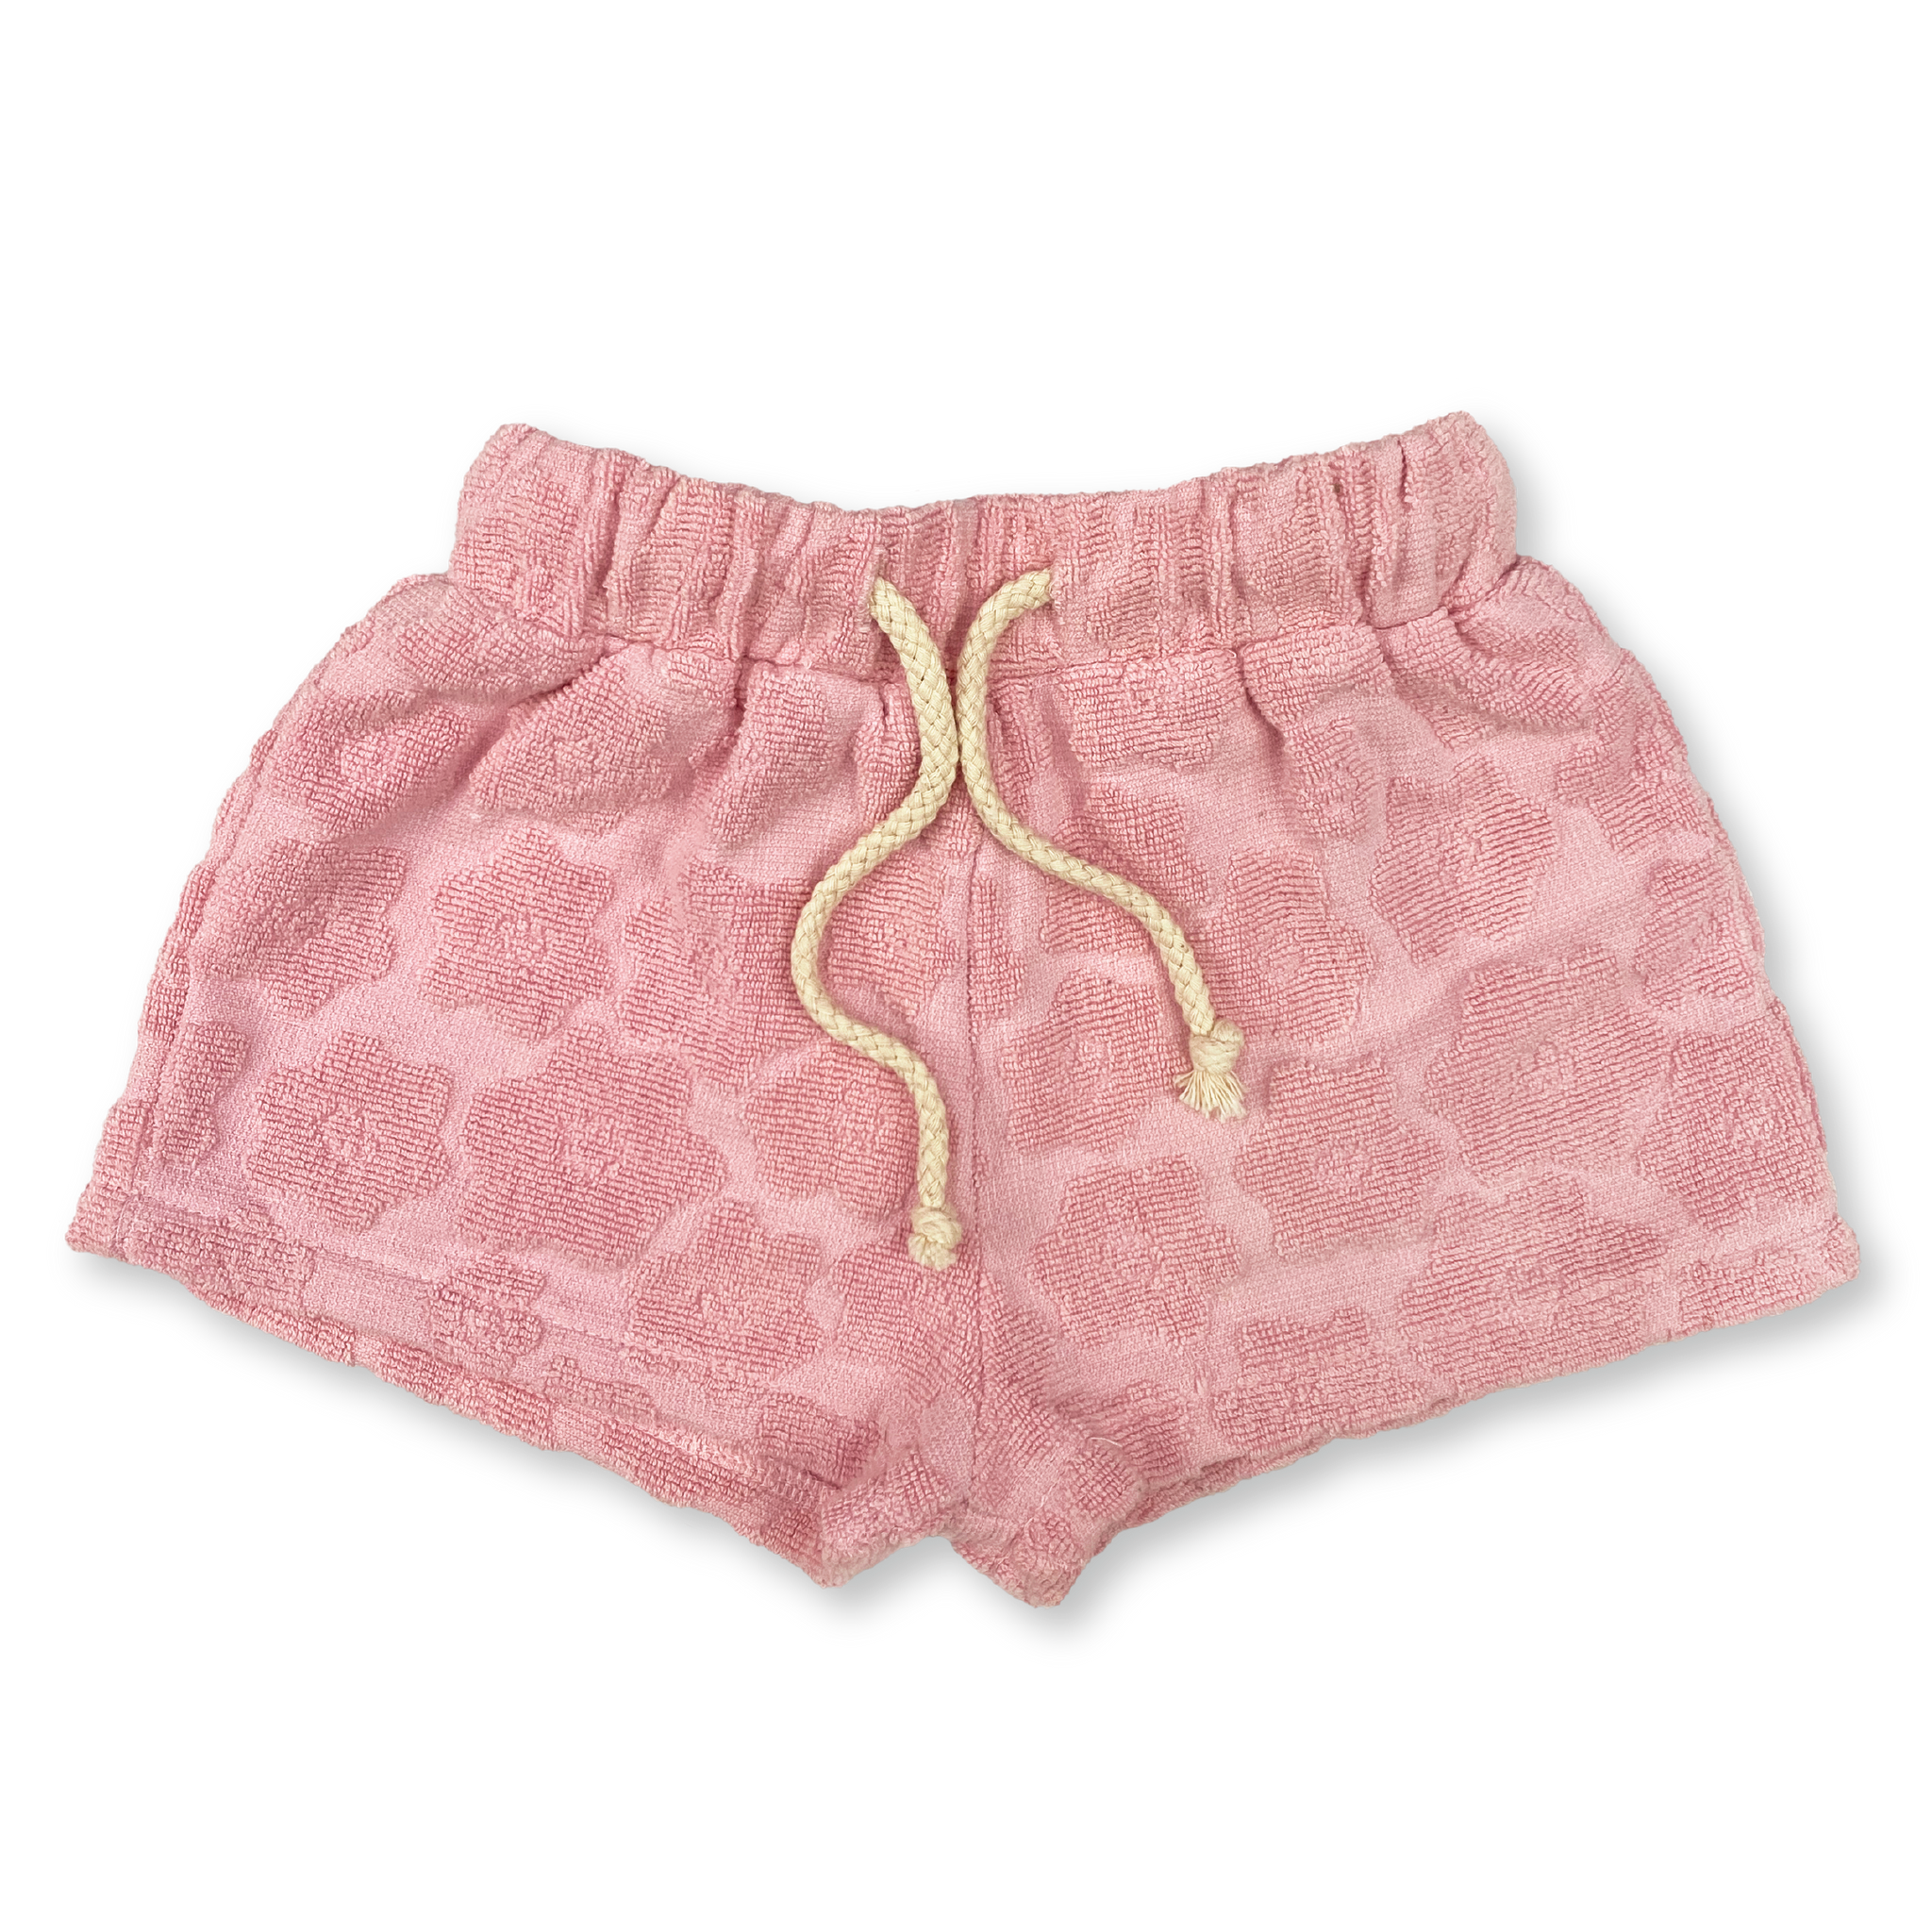 Grown Terry Shorts - Blossom Flower Drum